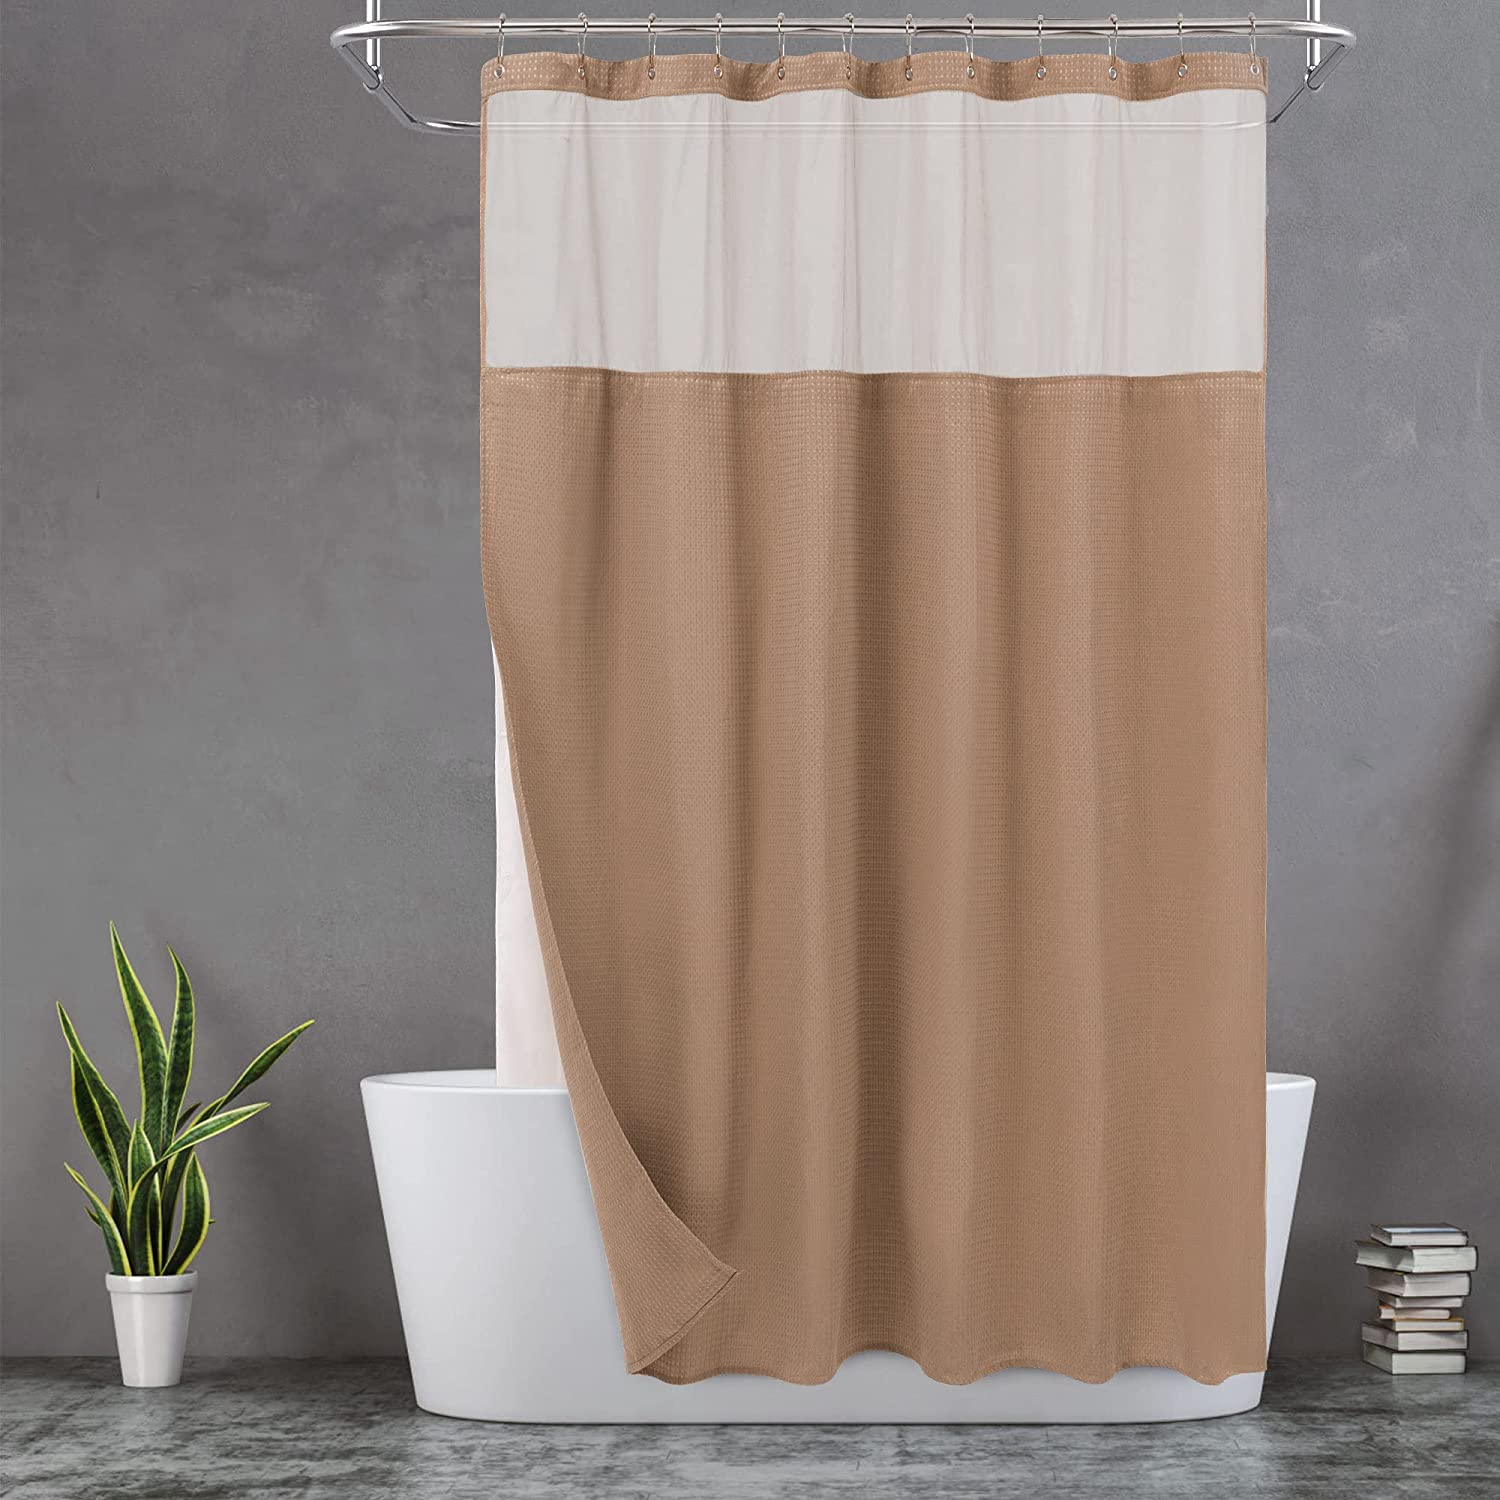 Waffle Weave Shower Curtain with Snap-in Fabric Liner Set H 12 Hooks Included 